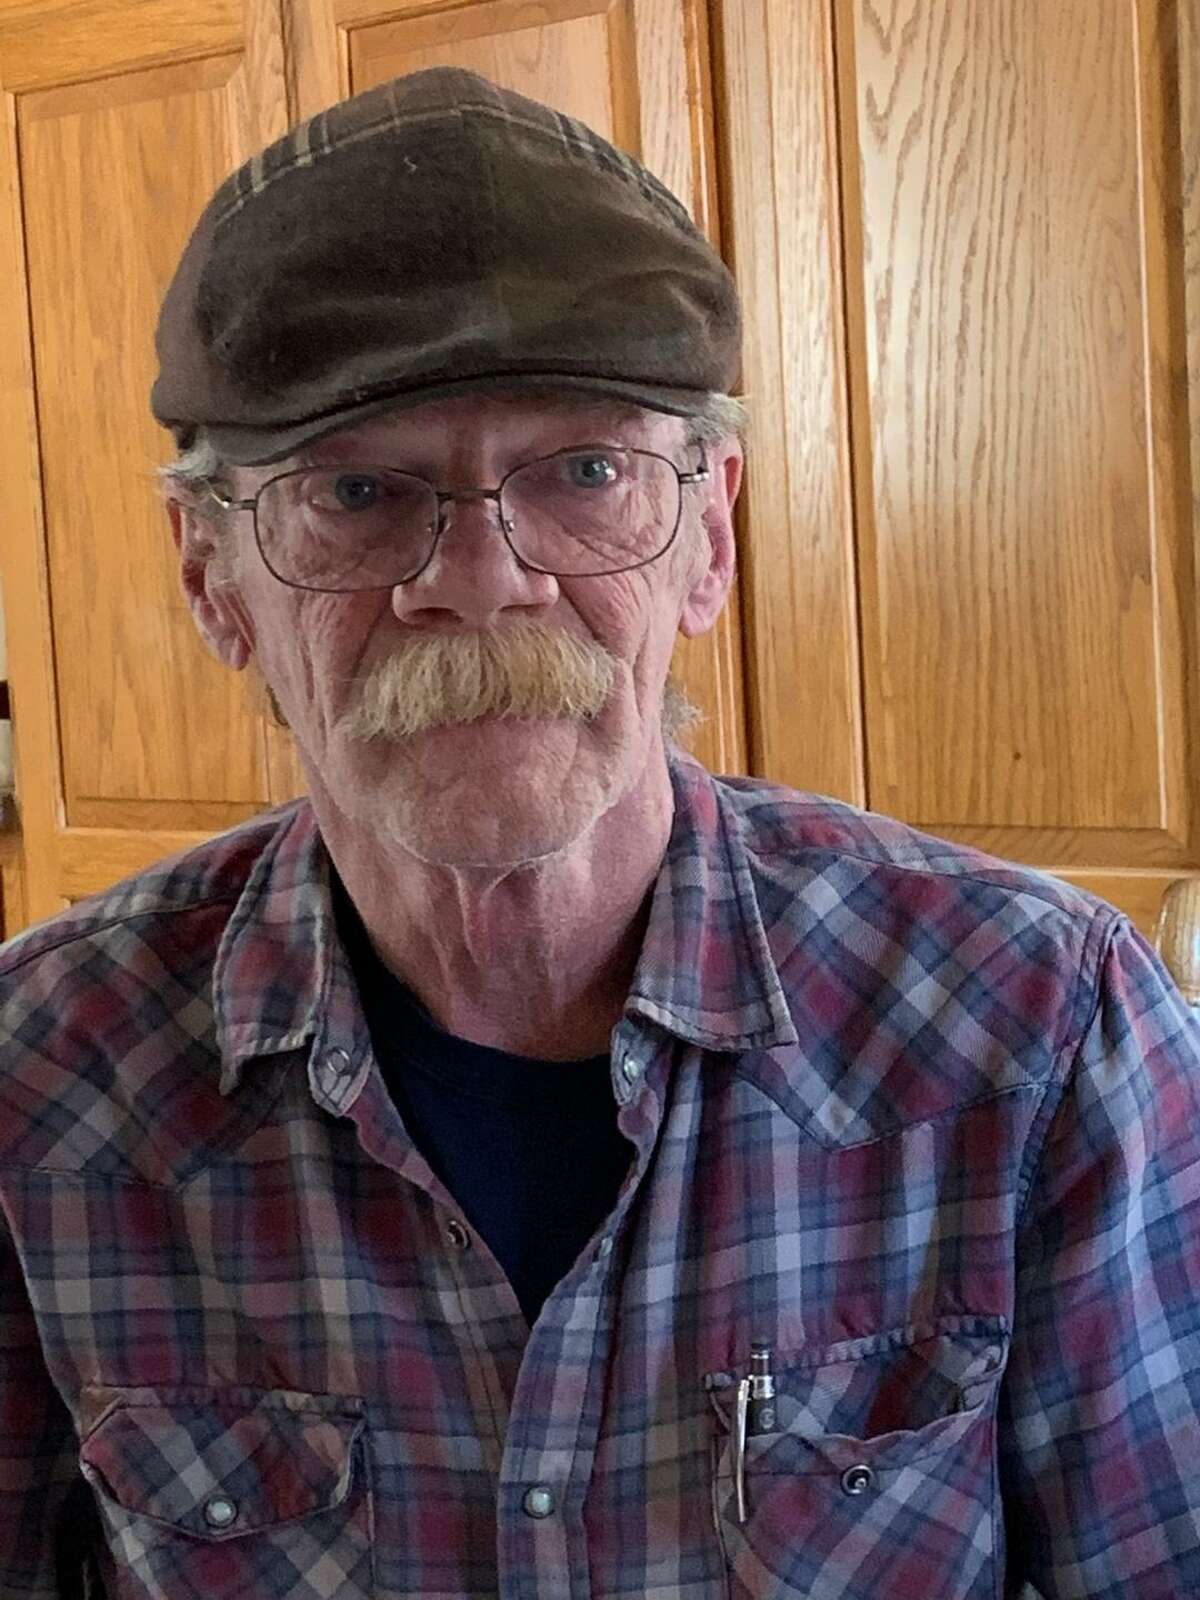 Lifelong Harwinton resident Bruce W. Wilcox was selected as the 2022 recipient of the Harwinton Outstanding Citizen Award. Nominations are now being accepted for the 2023 award. 